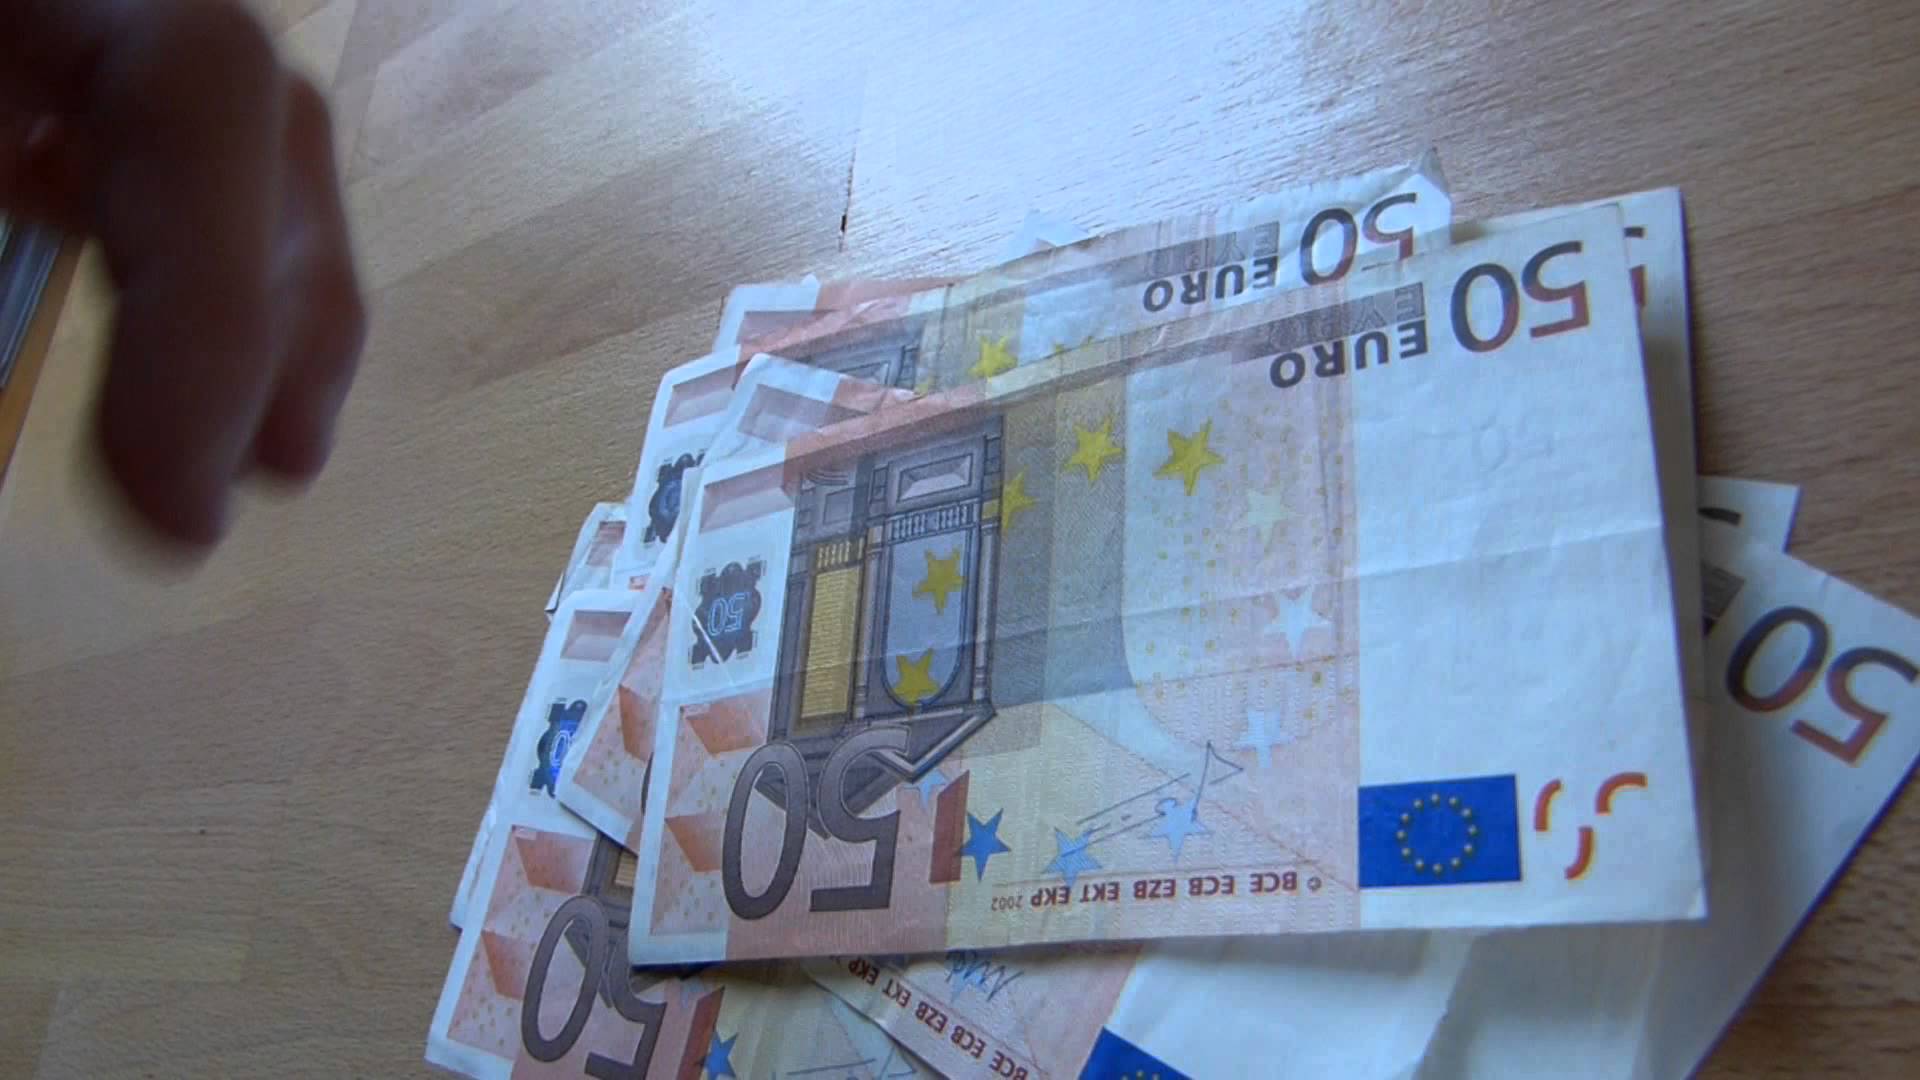 Countin' stack of Euro bills - YouTube